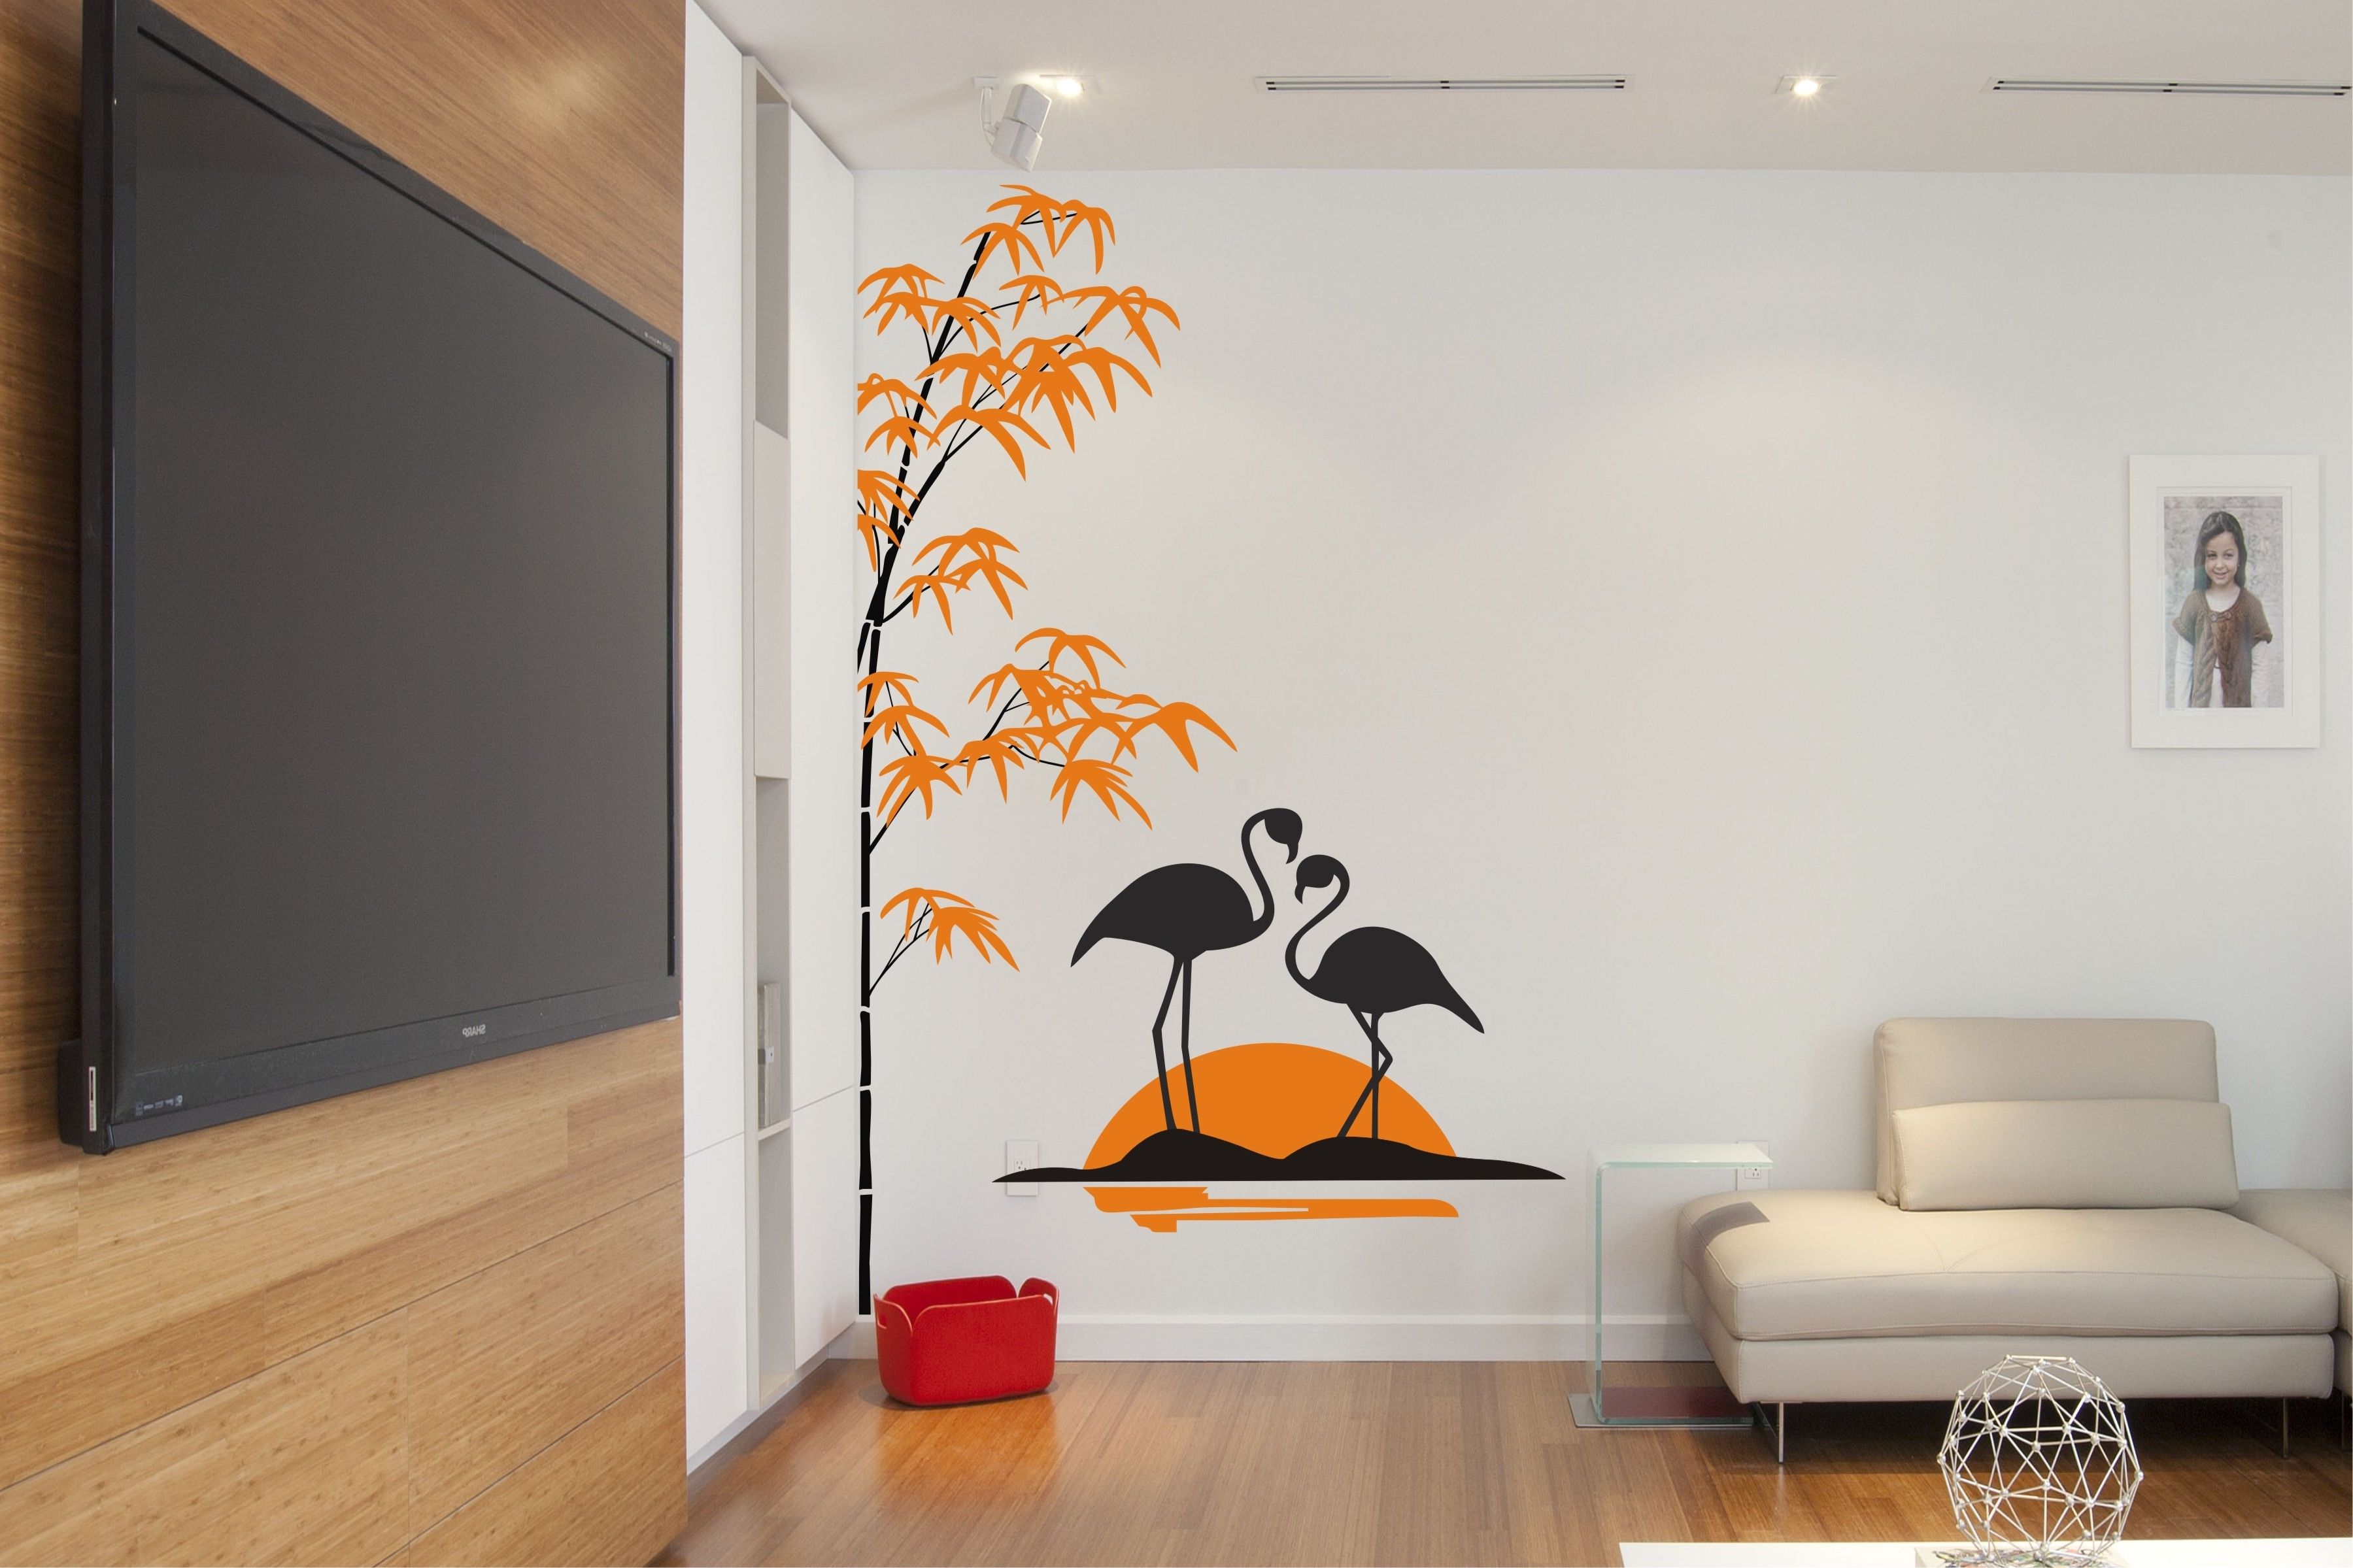 Bamboo Wall Art Intended For Most Recently Released Swan With Bamboo Tree (View 17 of 20)